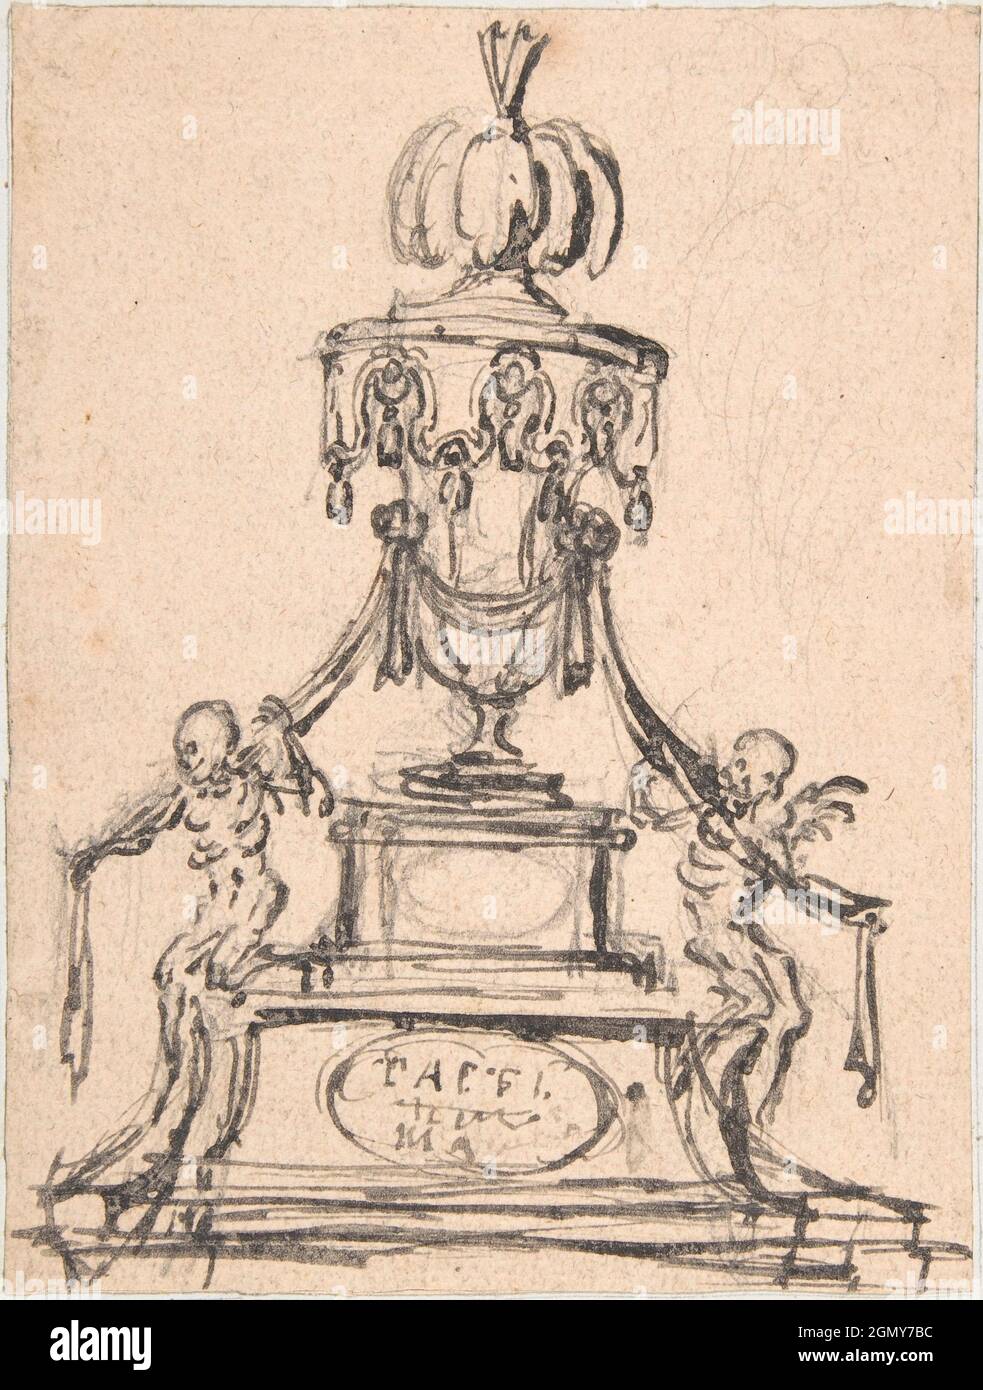 Tomb Monument with Skeletons. Artist: Anonymous, Italian, 17th century; Date: 17th century; Medium: Pen and brown ink, over graphite underdrawing; Stock Photo